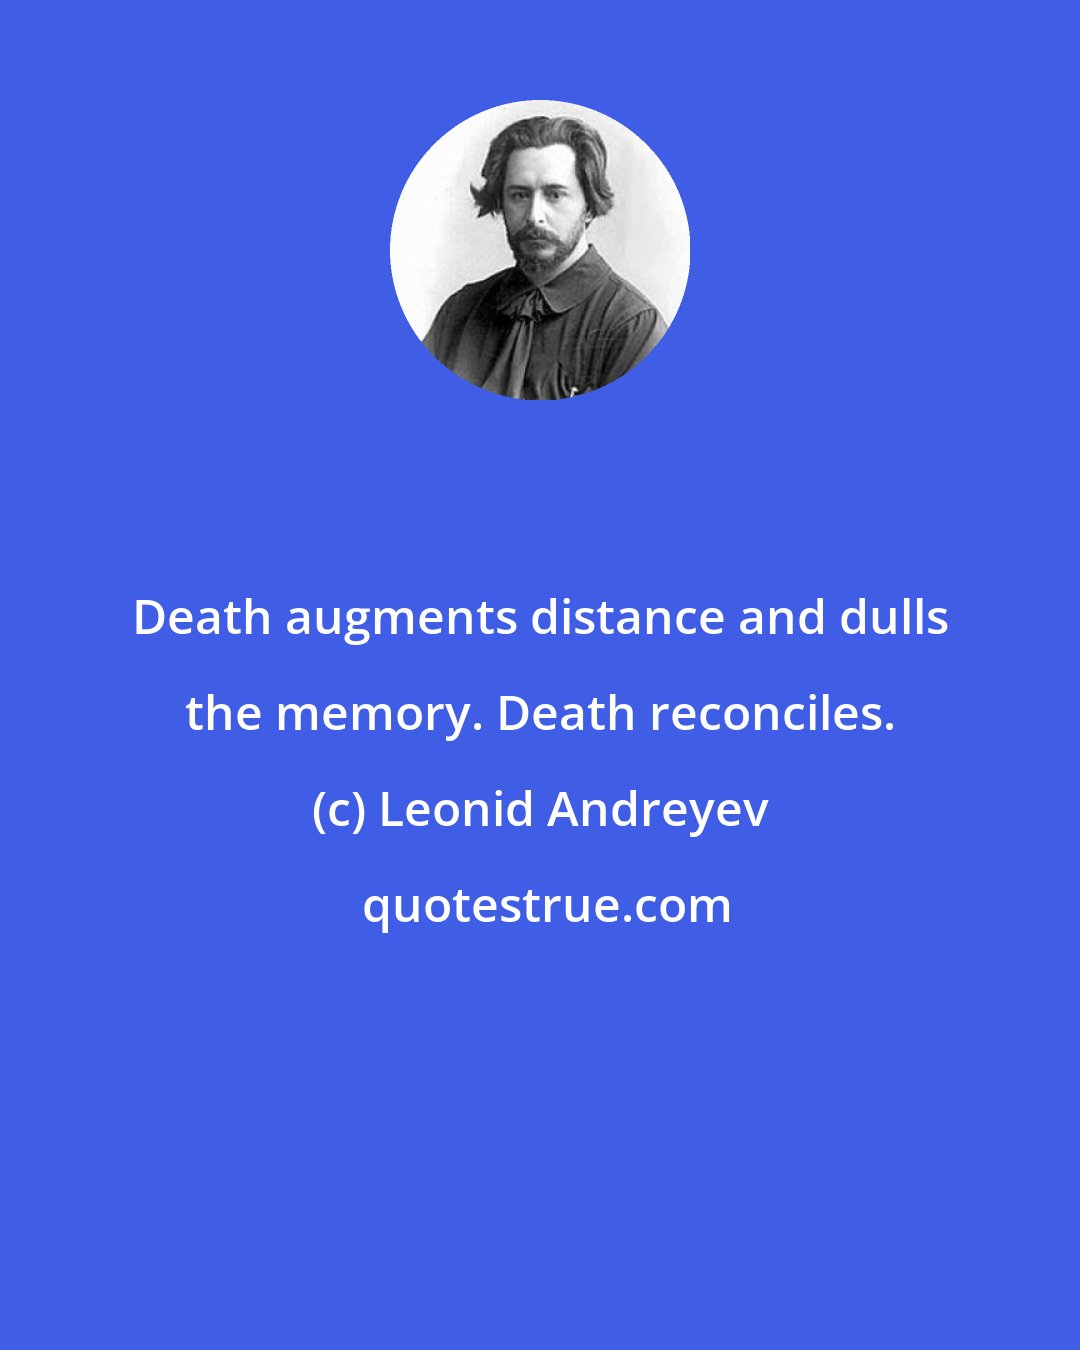 Leonid Andreyev: Death augments distance and dulls the memory. Death reconciles.